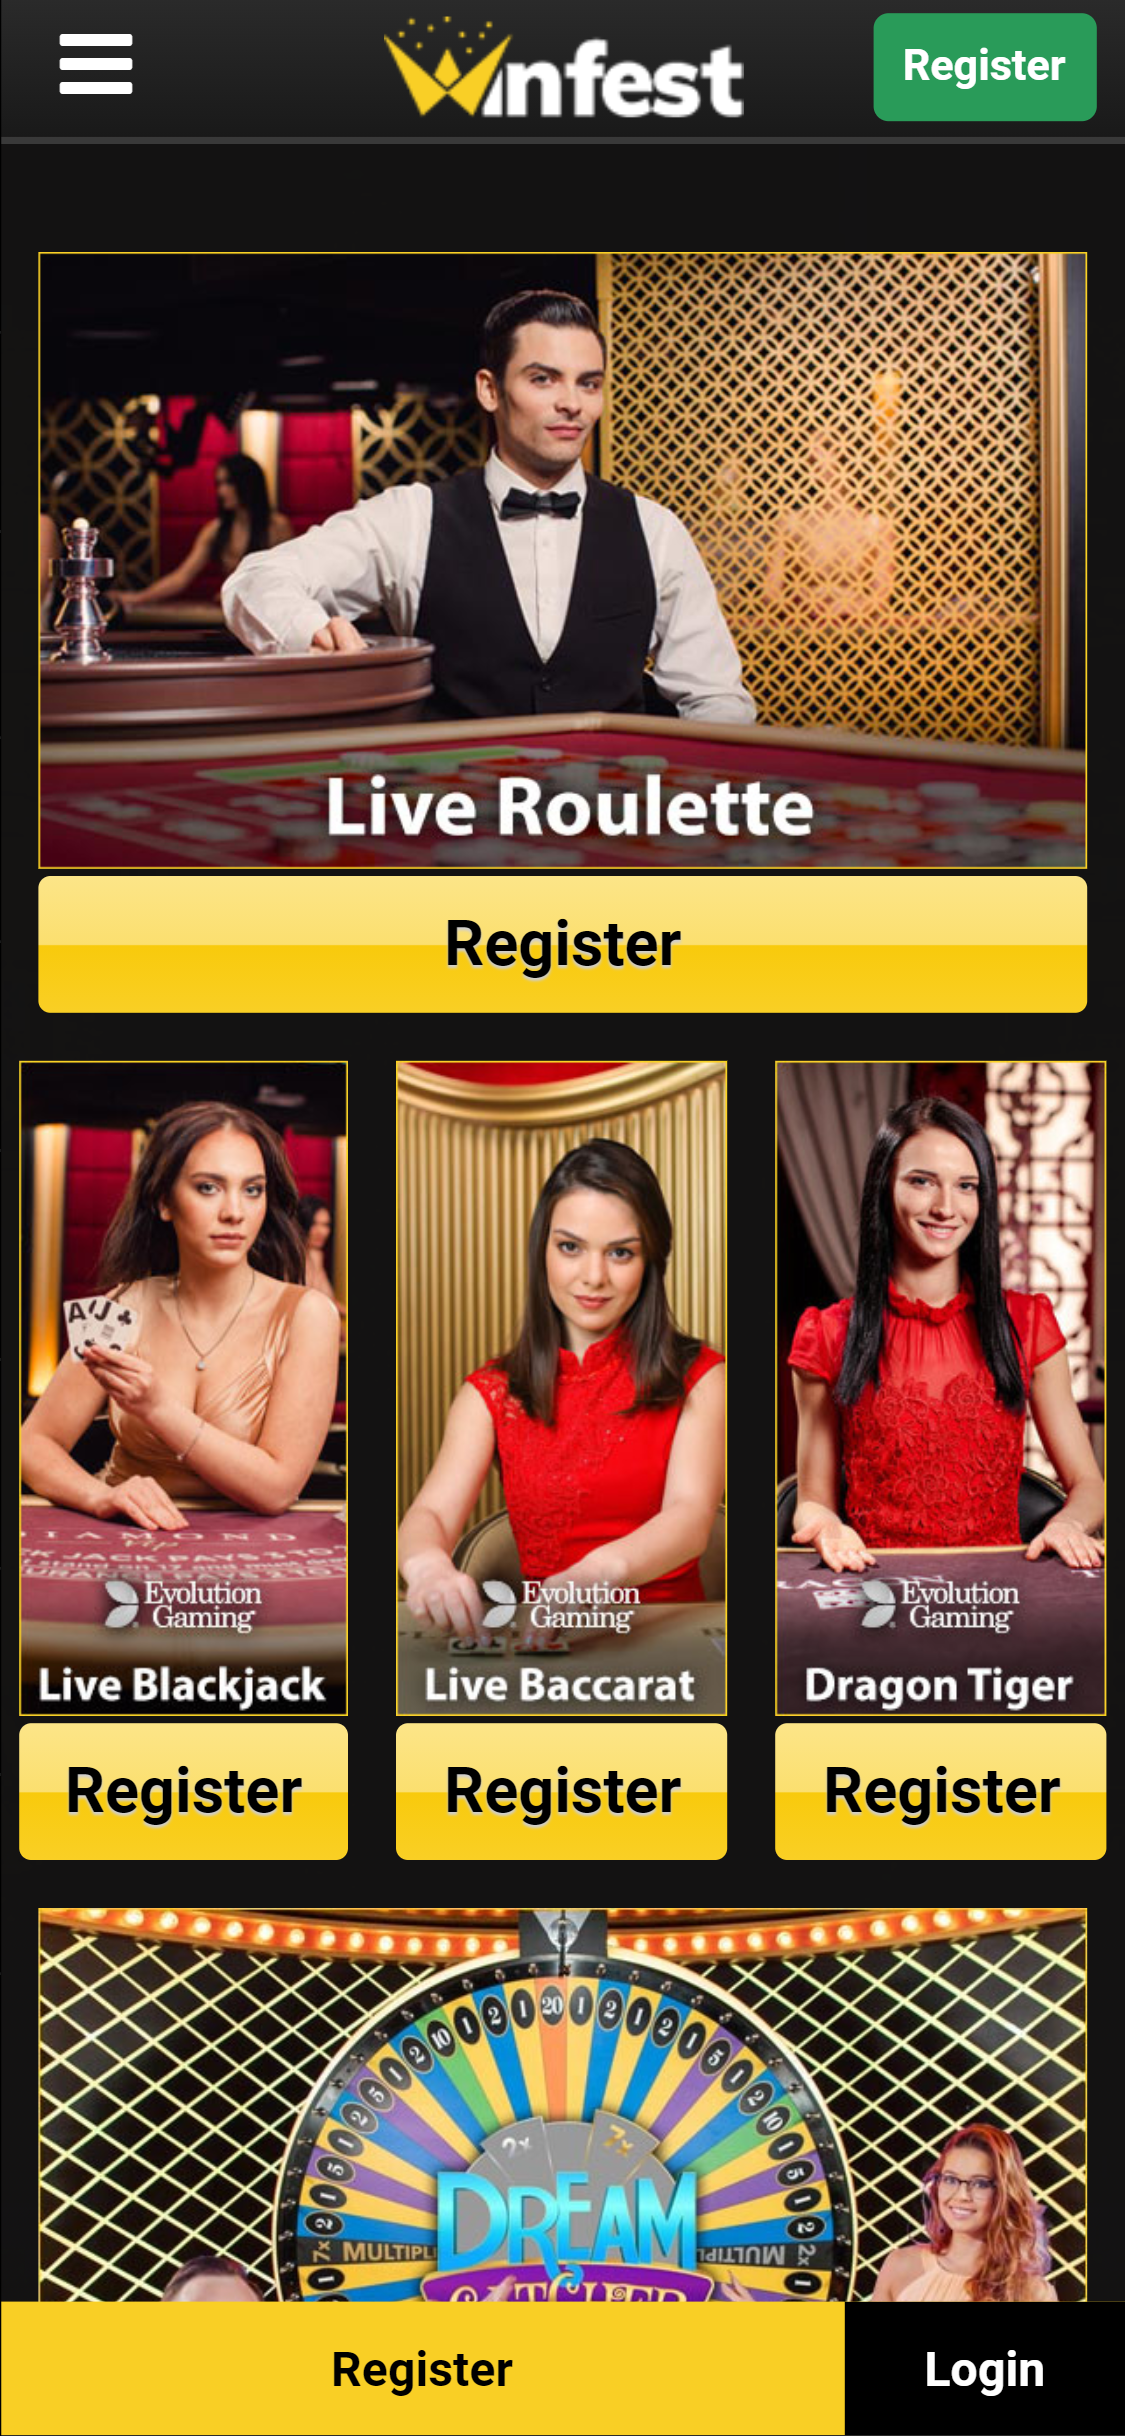 Winfest Casino Mobile Live Dealer Games Review